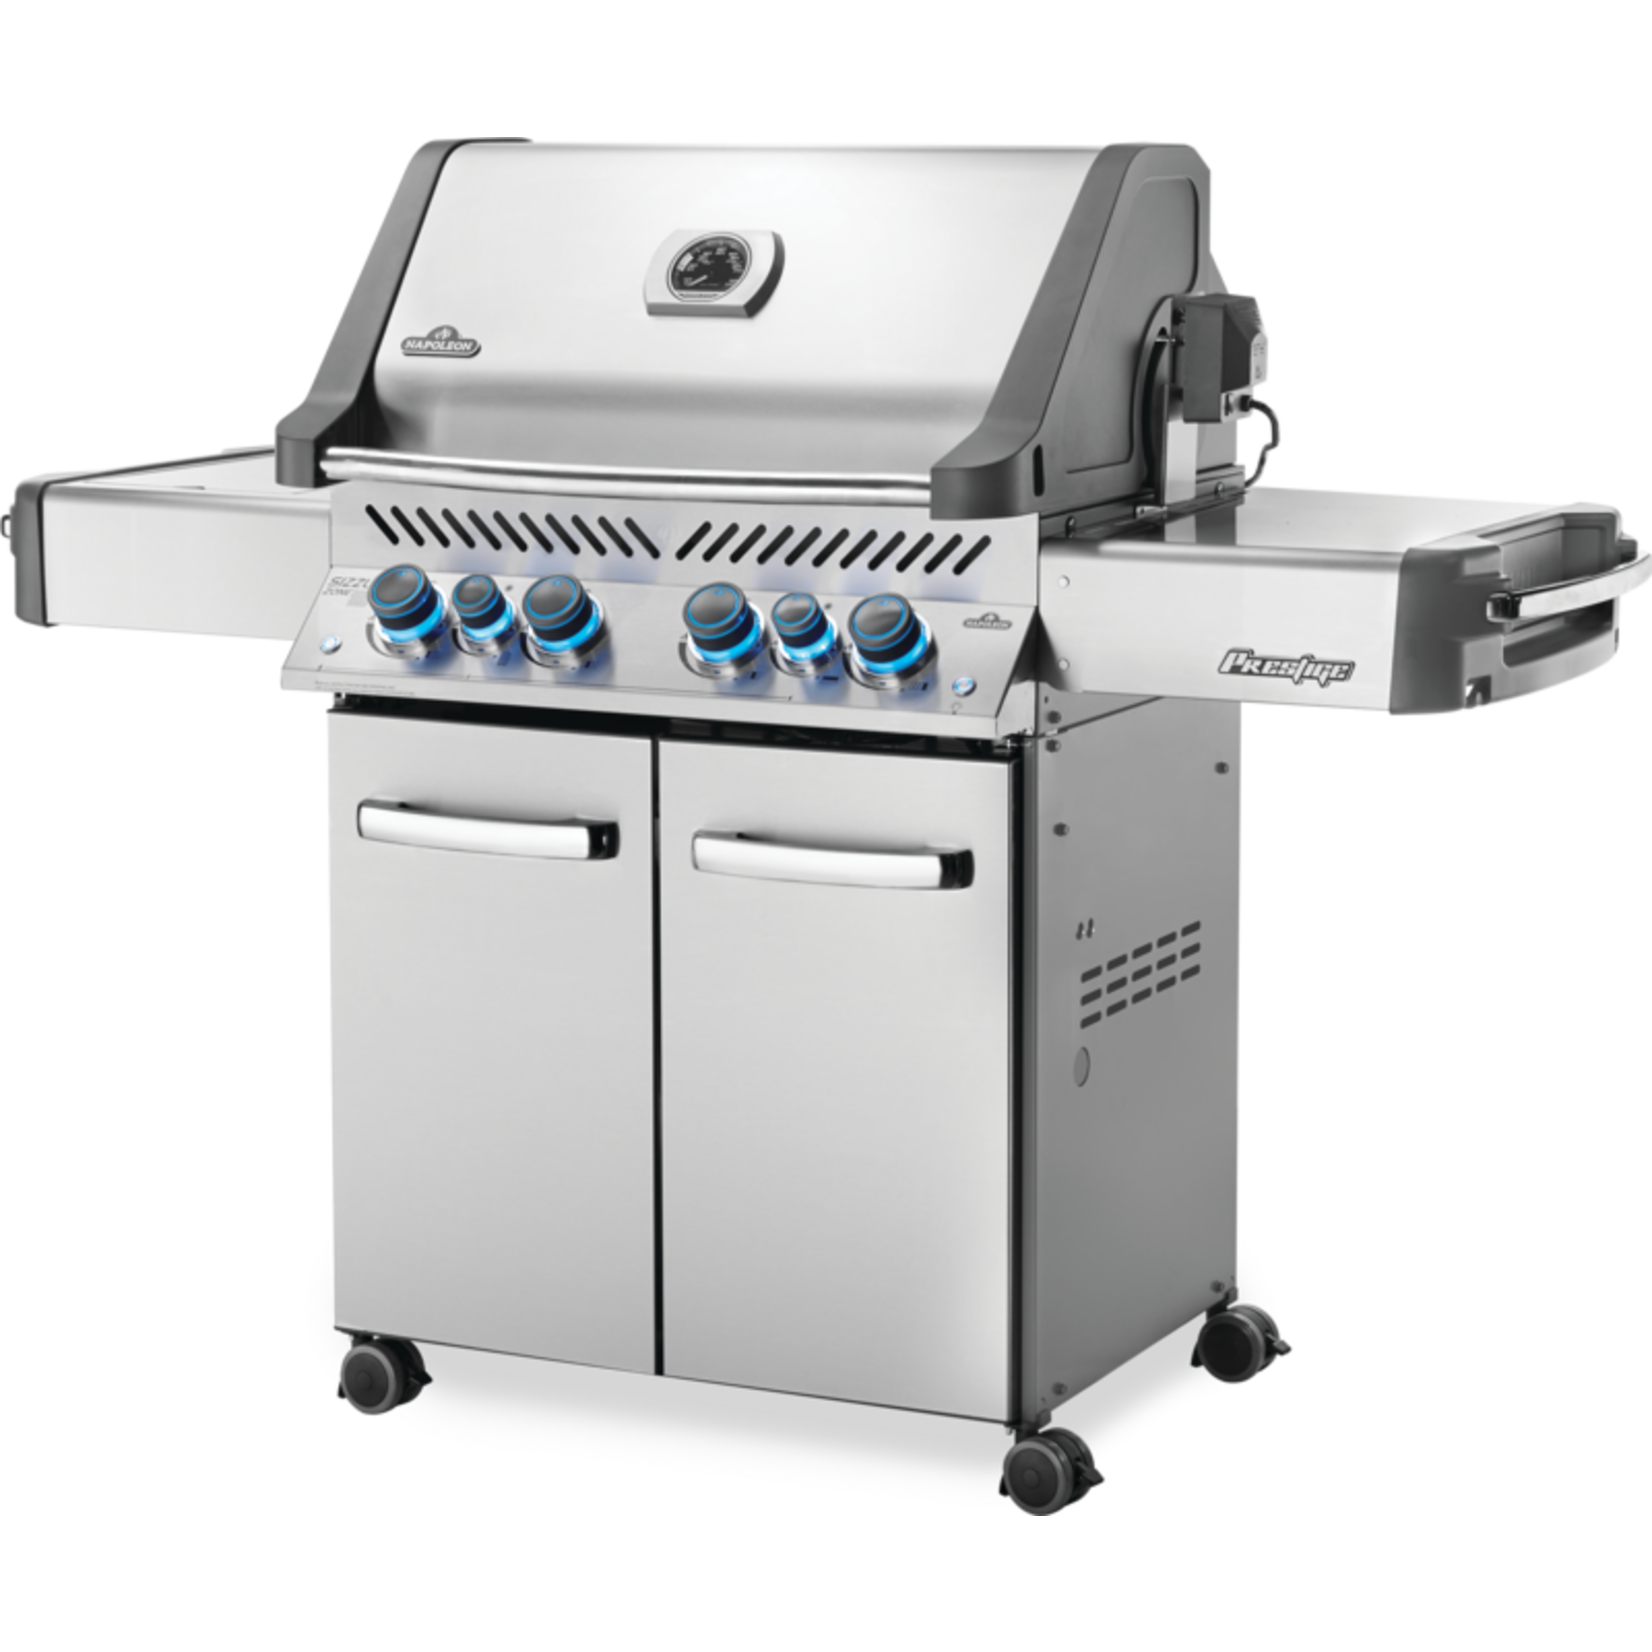 Napoleon Prestige® 500 Propane Gas Grill with Infrared Side and Rear Burners, Stainless Steel ($125 Instant Rebate)